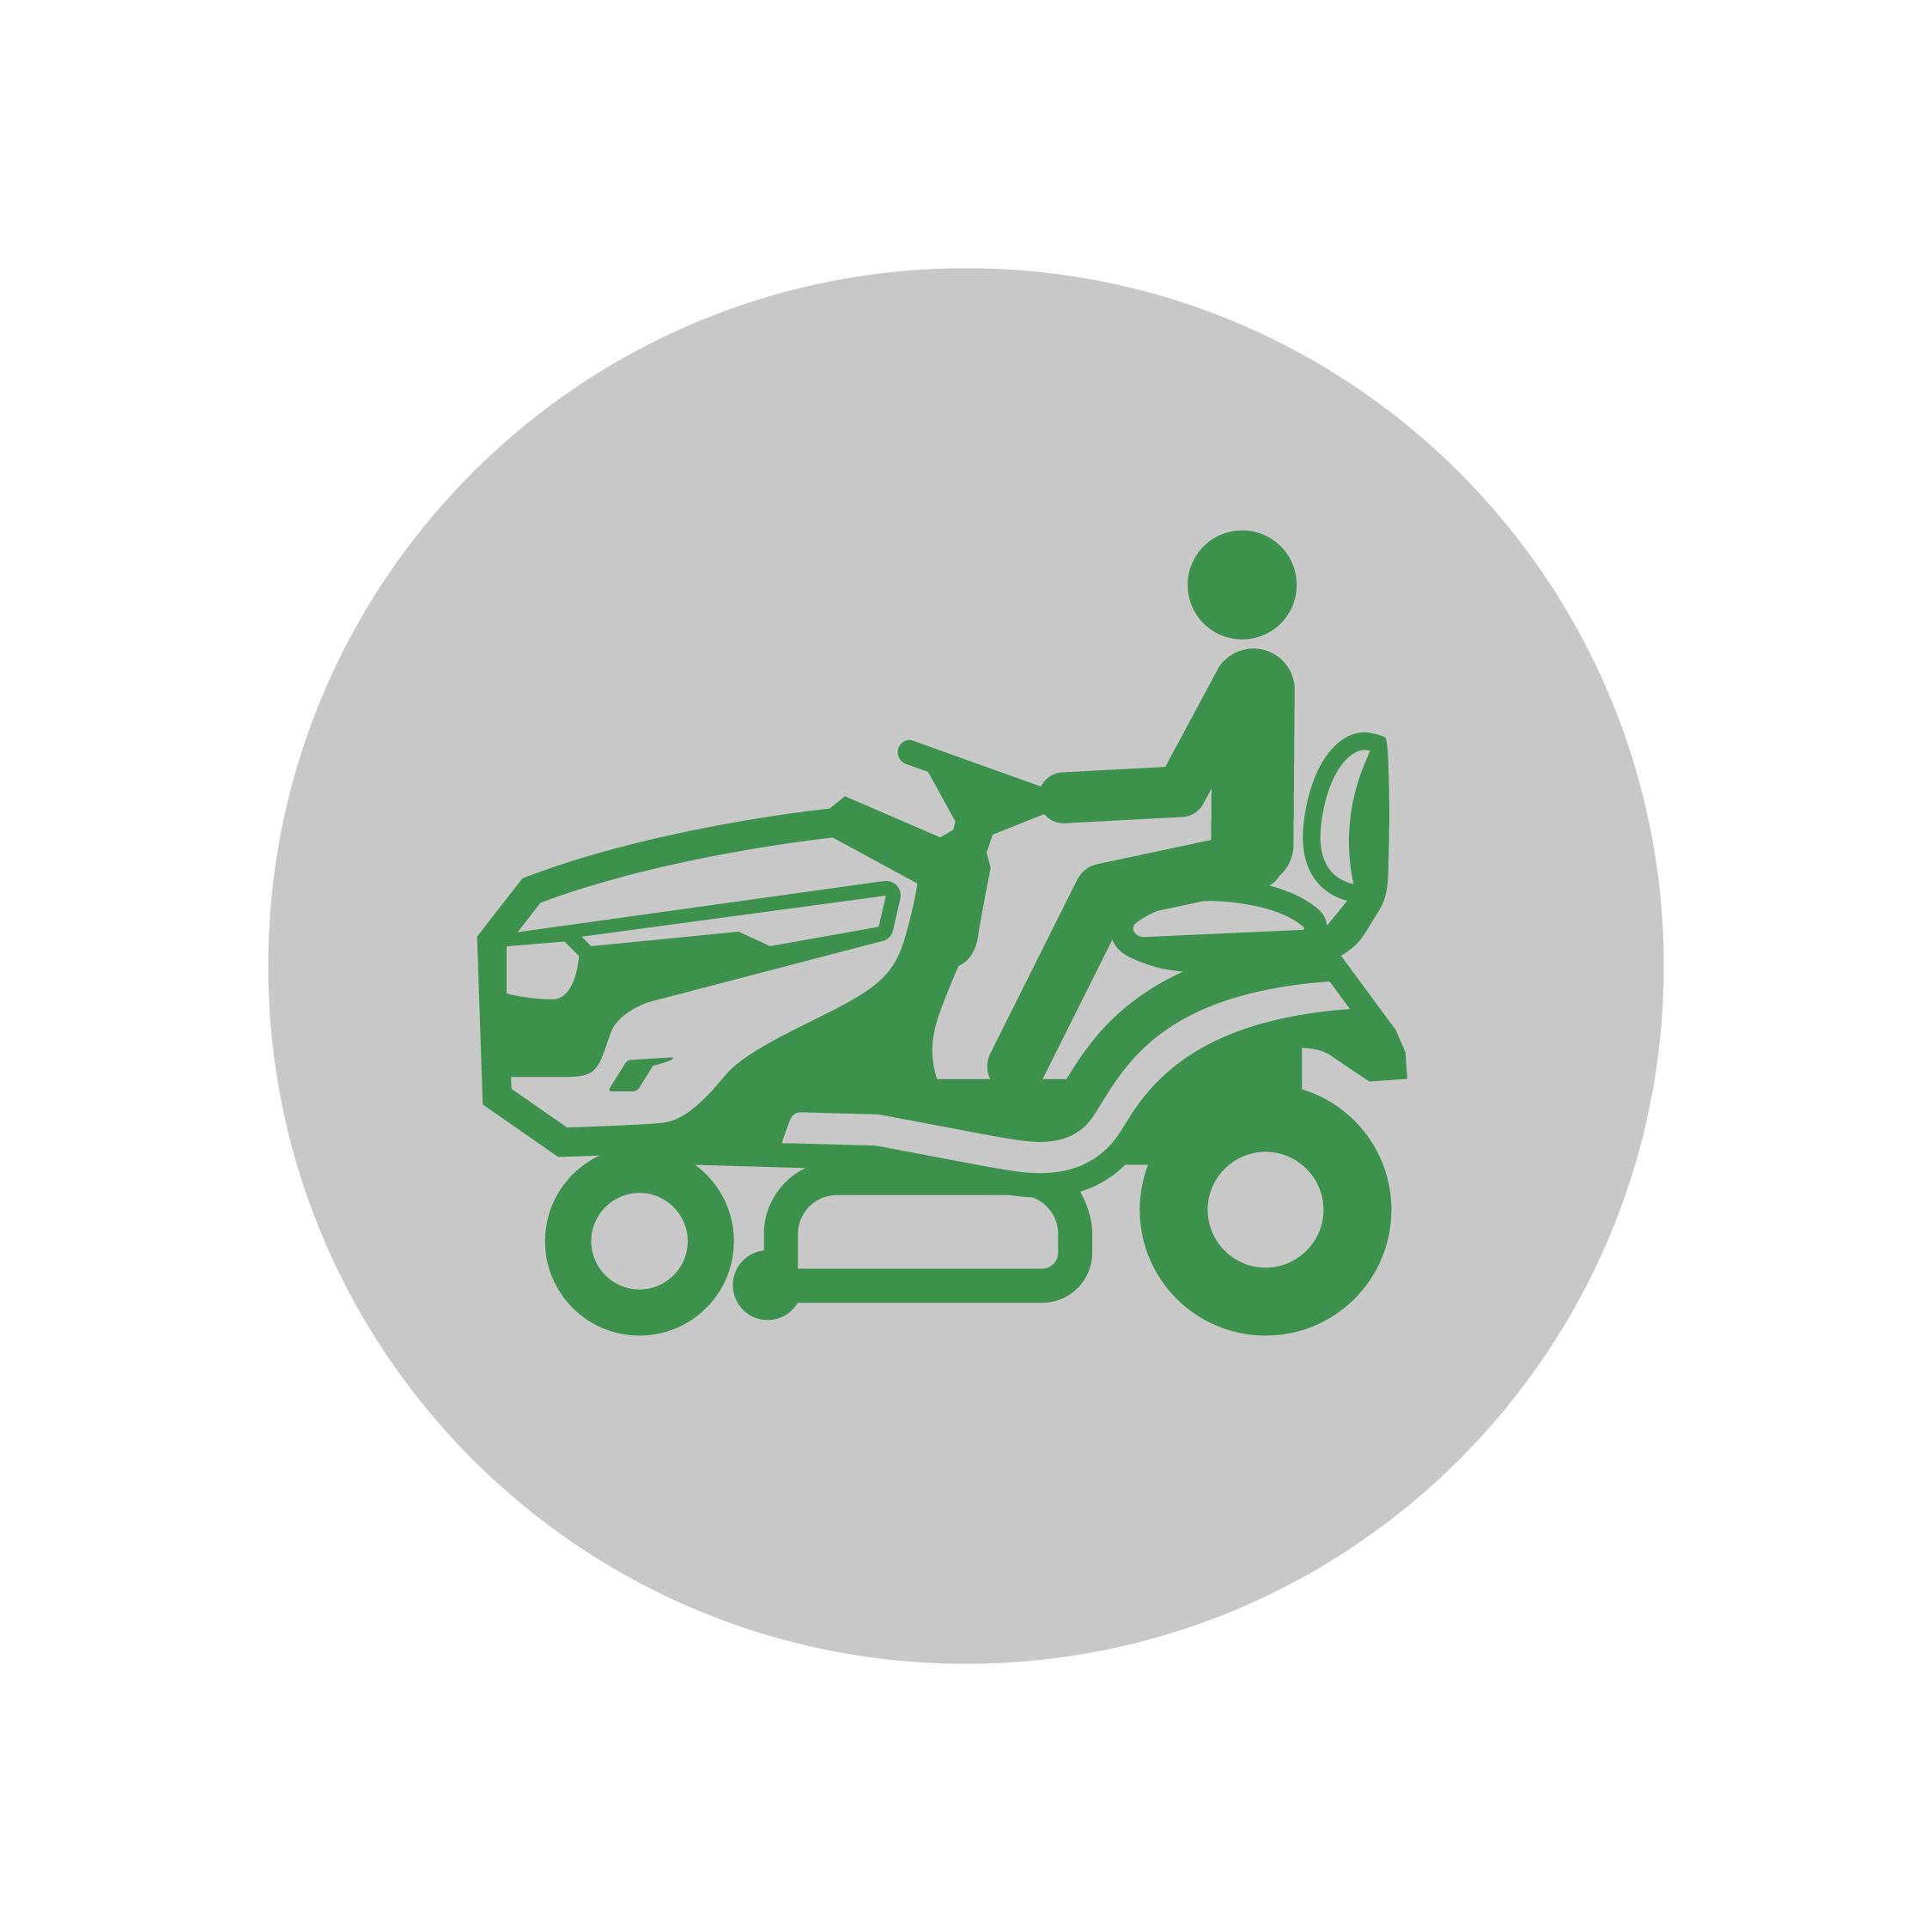 Graphic of a man riding a lawn mower